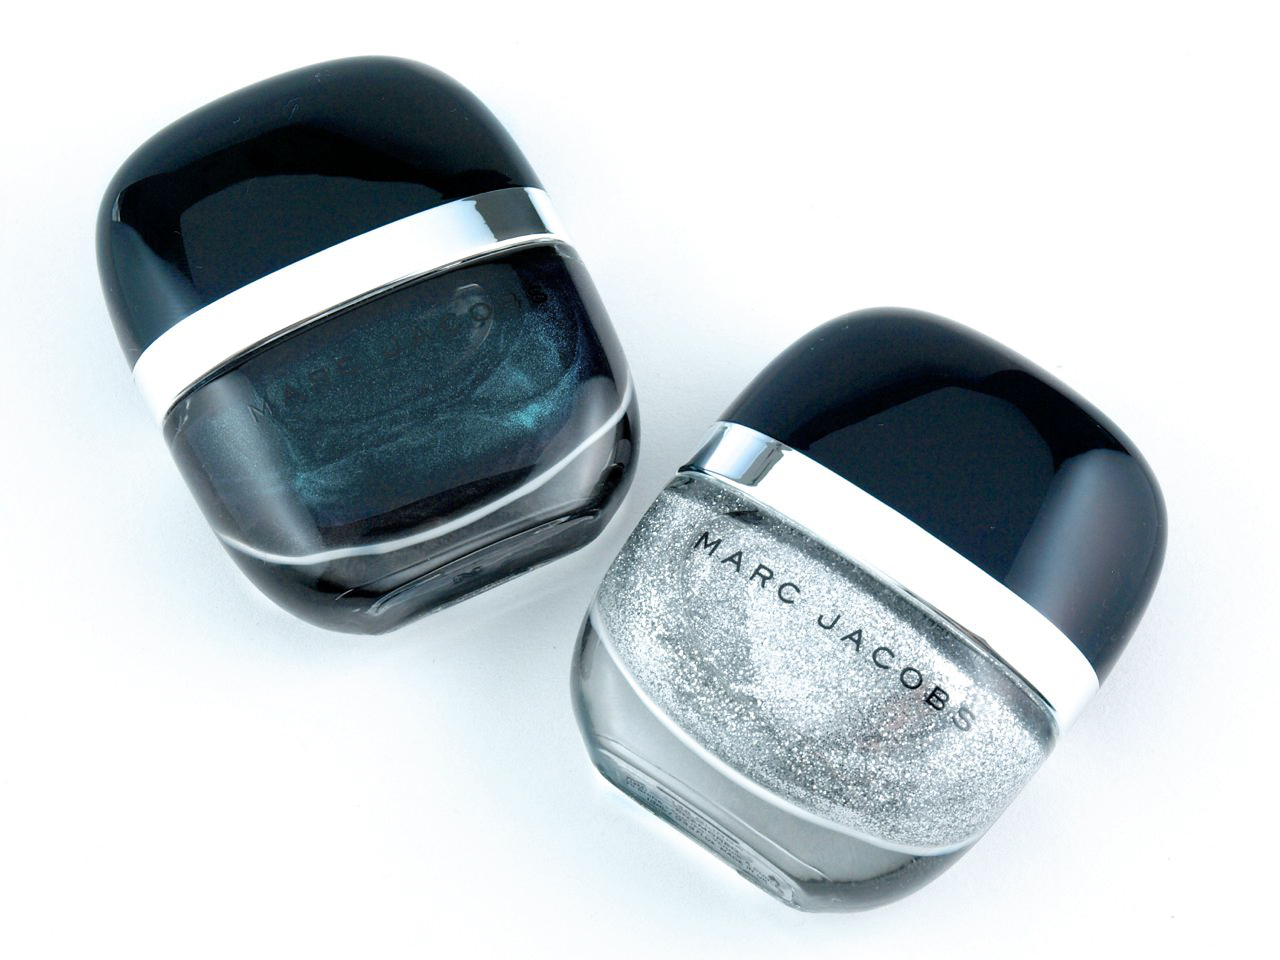 Marc Jacobs Enamored Hi-Shine Nail Lacuer in "Sally" & "Glinda": Review and Swatches